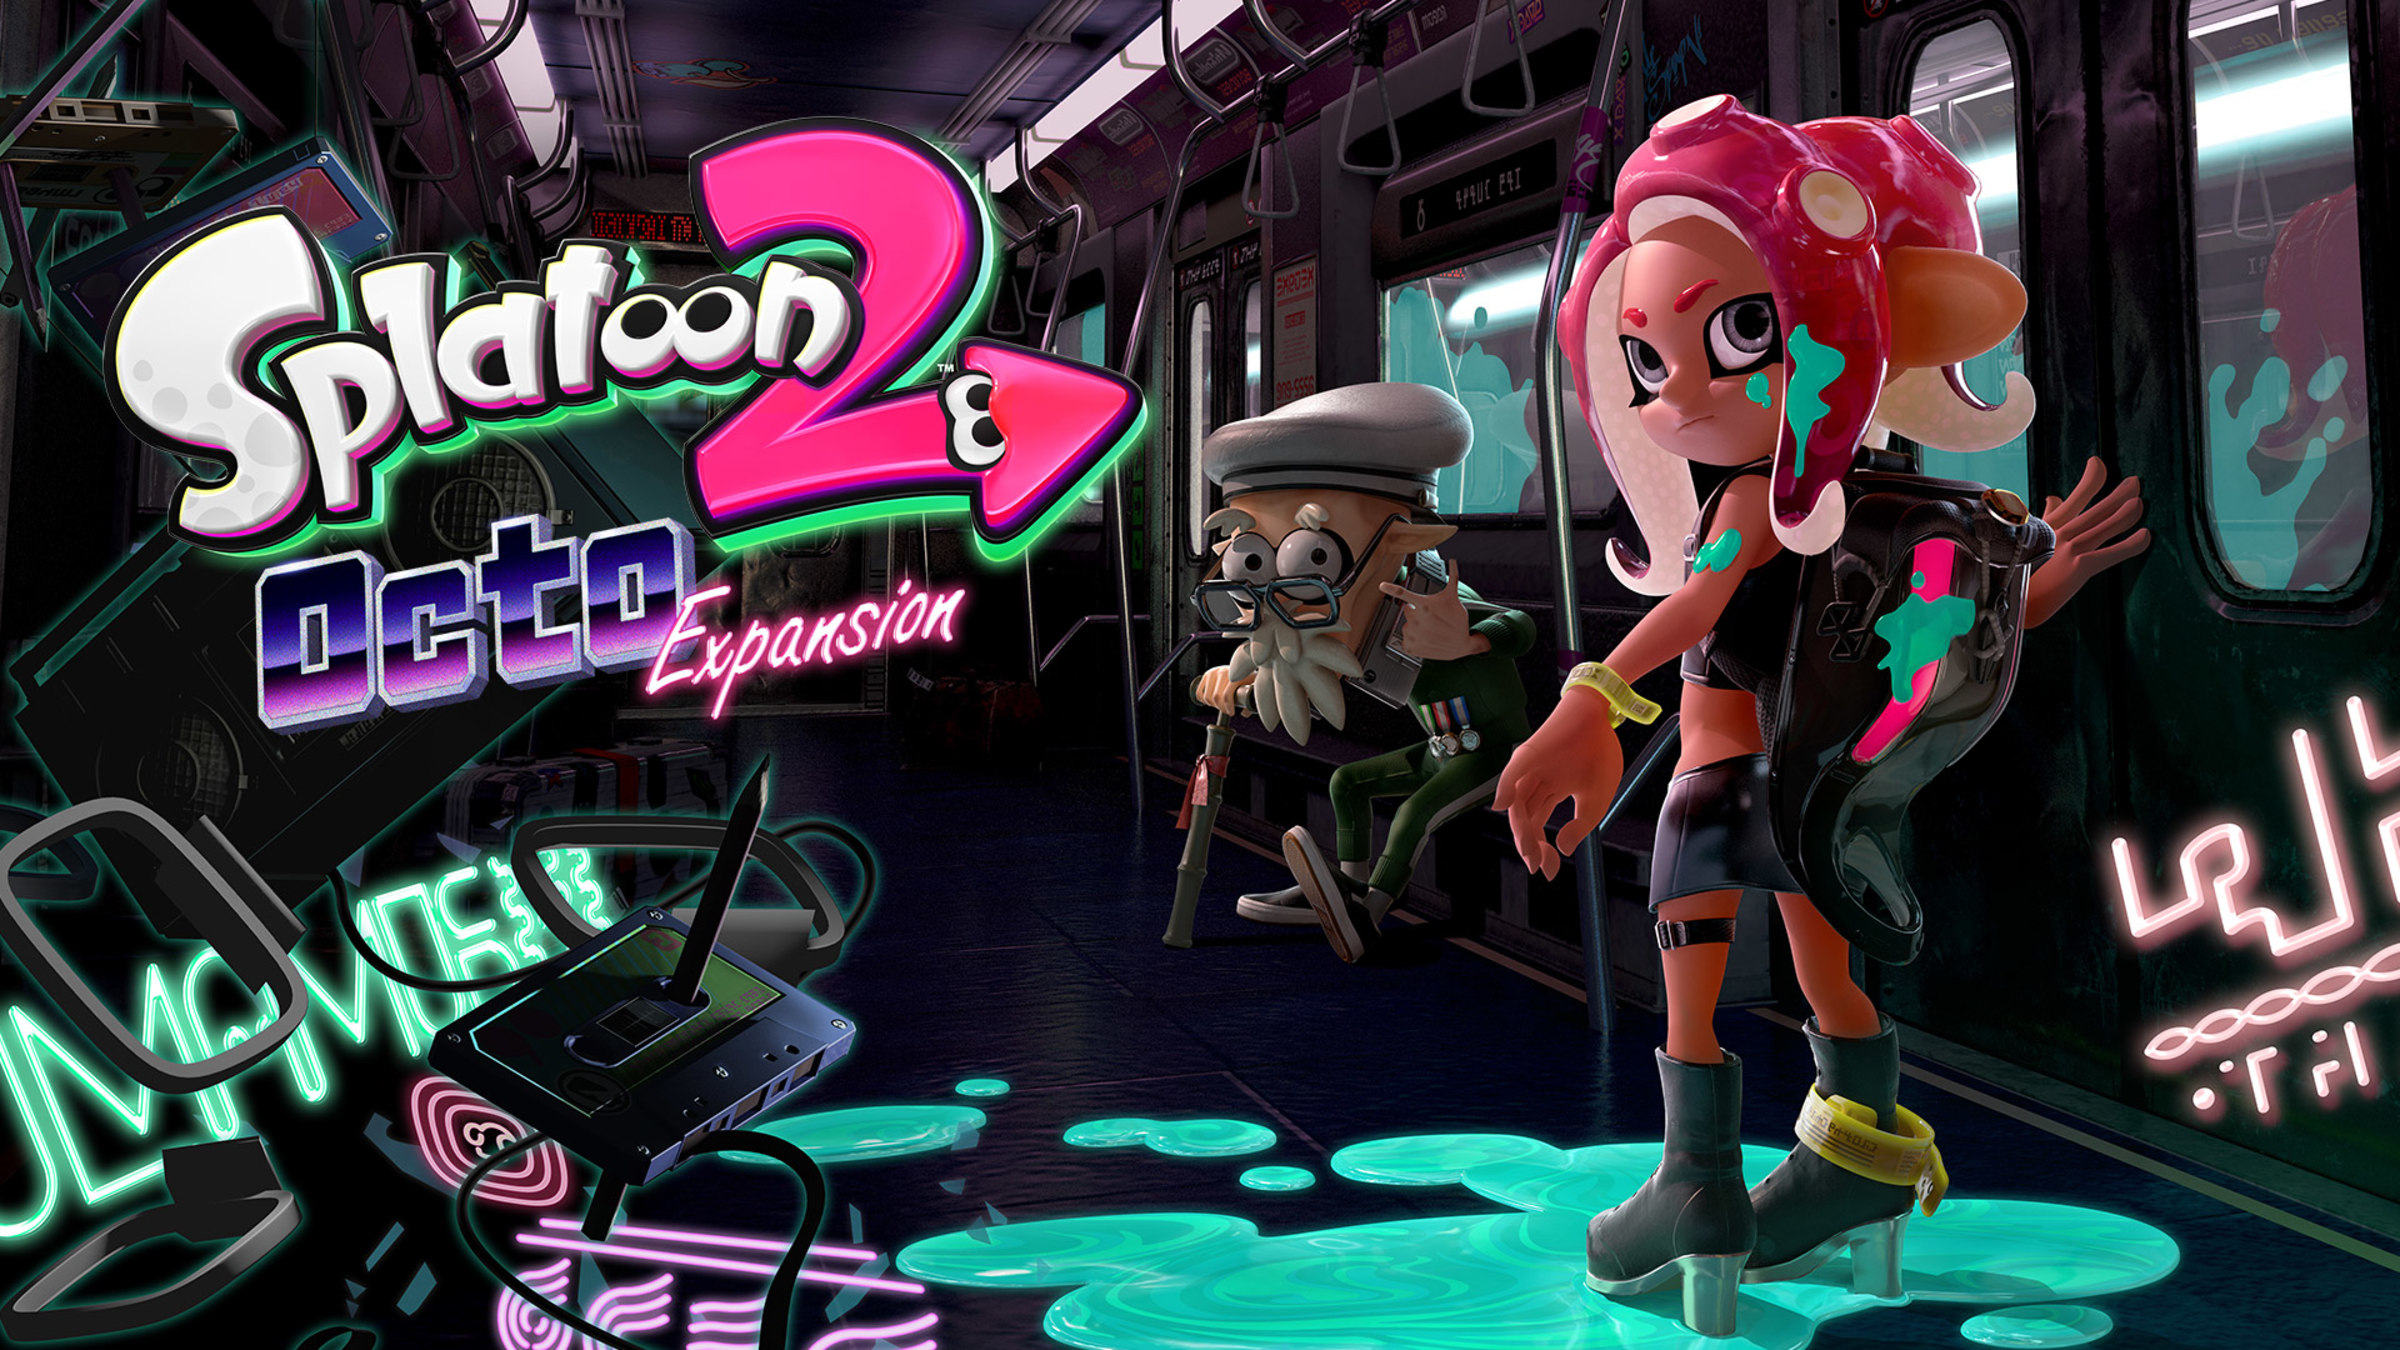 Official Switch Site Expansion - Splatoon™ Octo Nintendo 2: Nintendo for